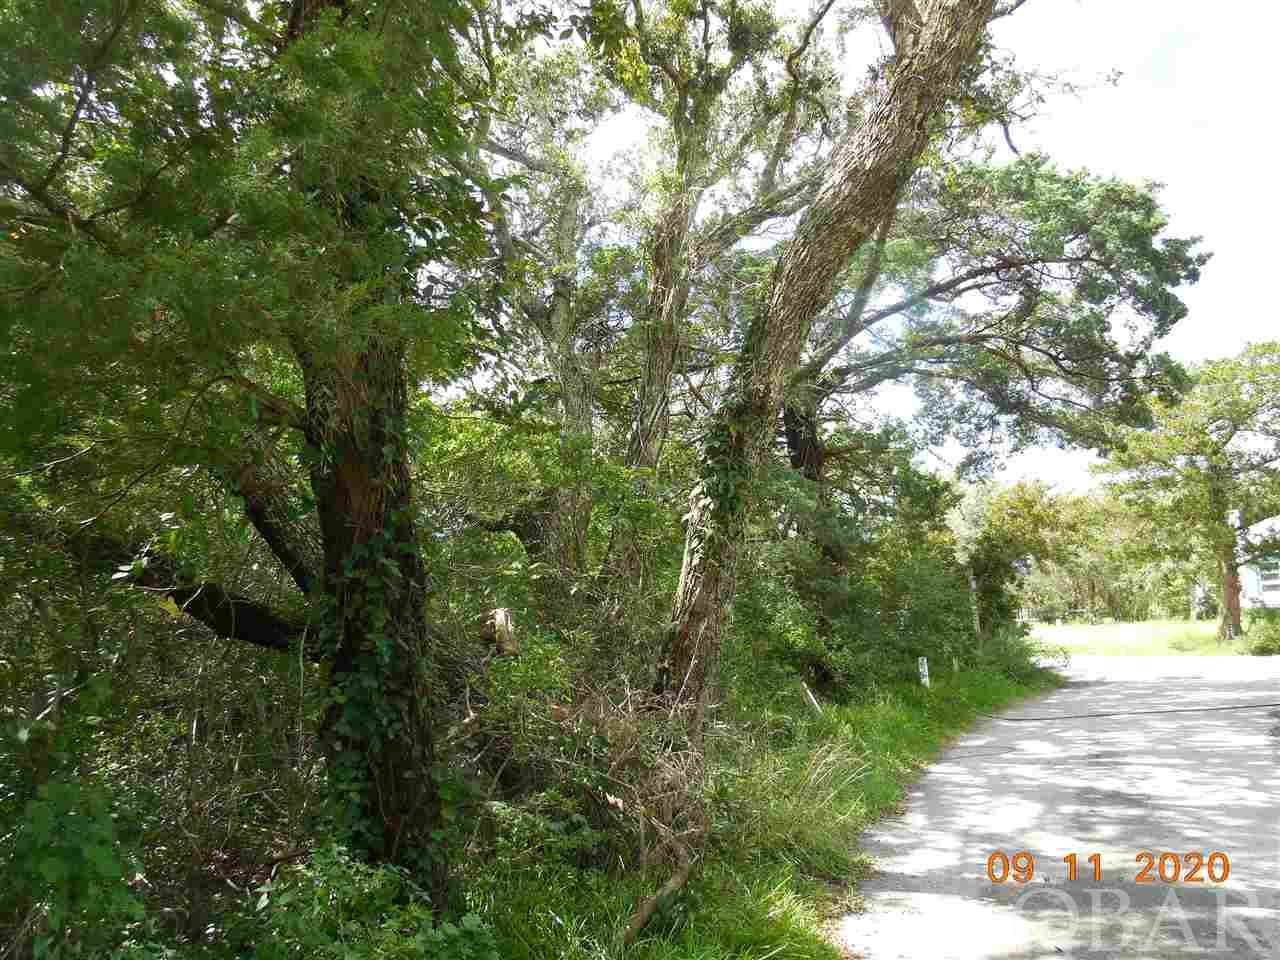 A 6,608 sq. ft. lot on Martha Jane Lane. Located off Lighthouse Rd, convenient to Springer's Point Preserve, shops, restaurants and Silver Lake harbor. The historic Ocracoke Lighthouse is across the street. This property has many mature trees and is located on a cute village lane. Conveys with a 3 bedroom septic permit. No restrictive covenants. Taxes shown are for all 3 parcels.